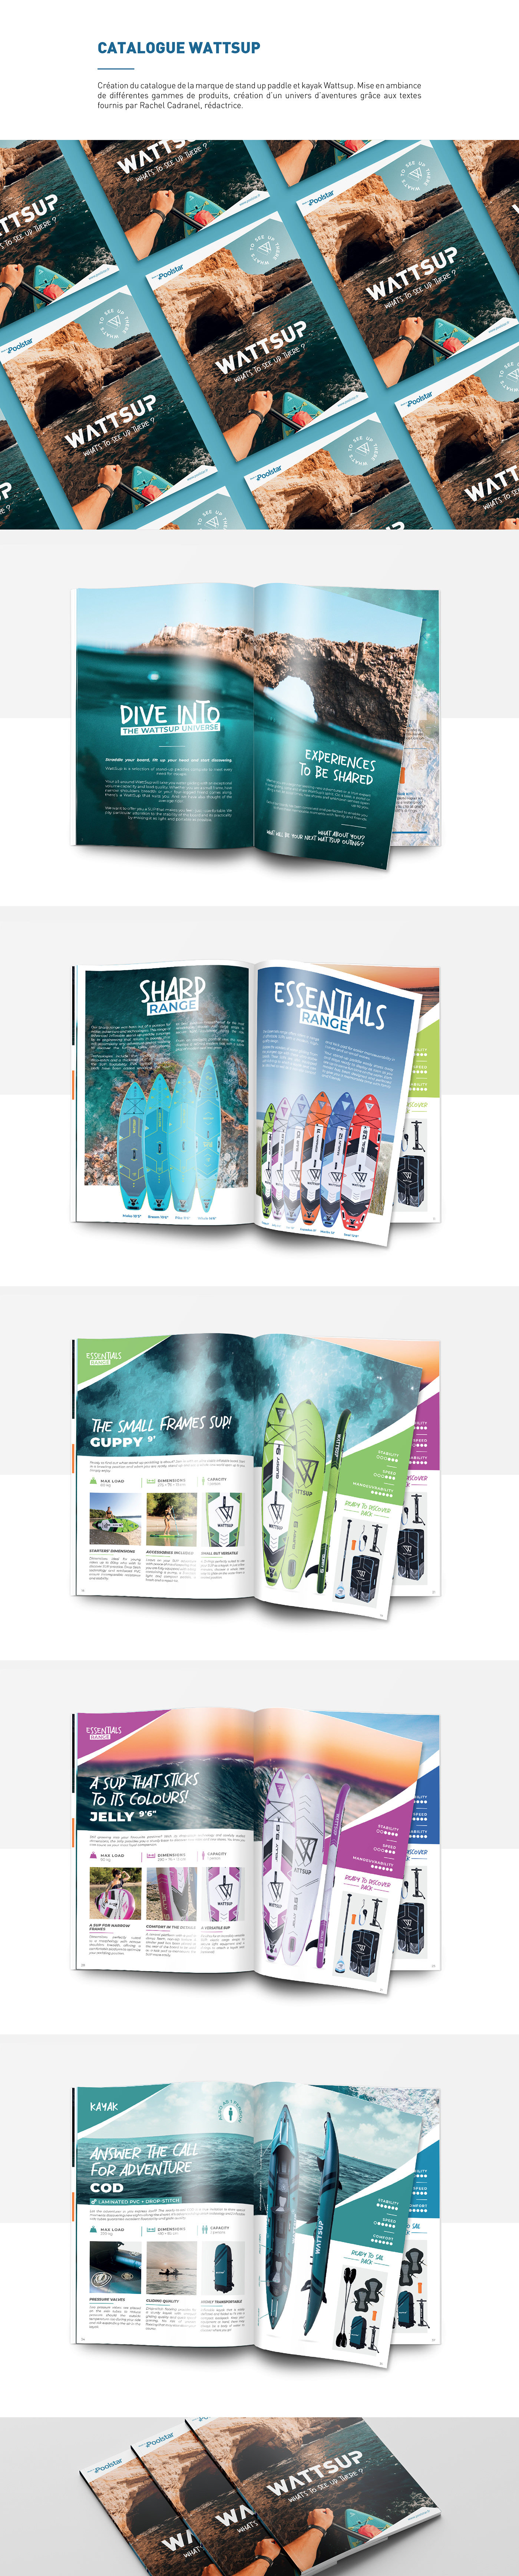 catalog Catalogue graphic design  Ocean sport stand up paddle water Watersports wattsup